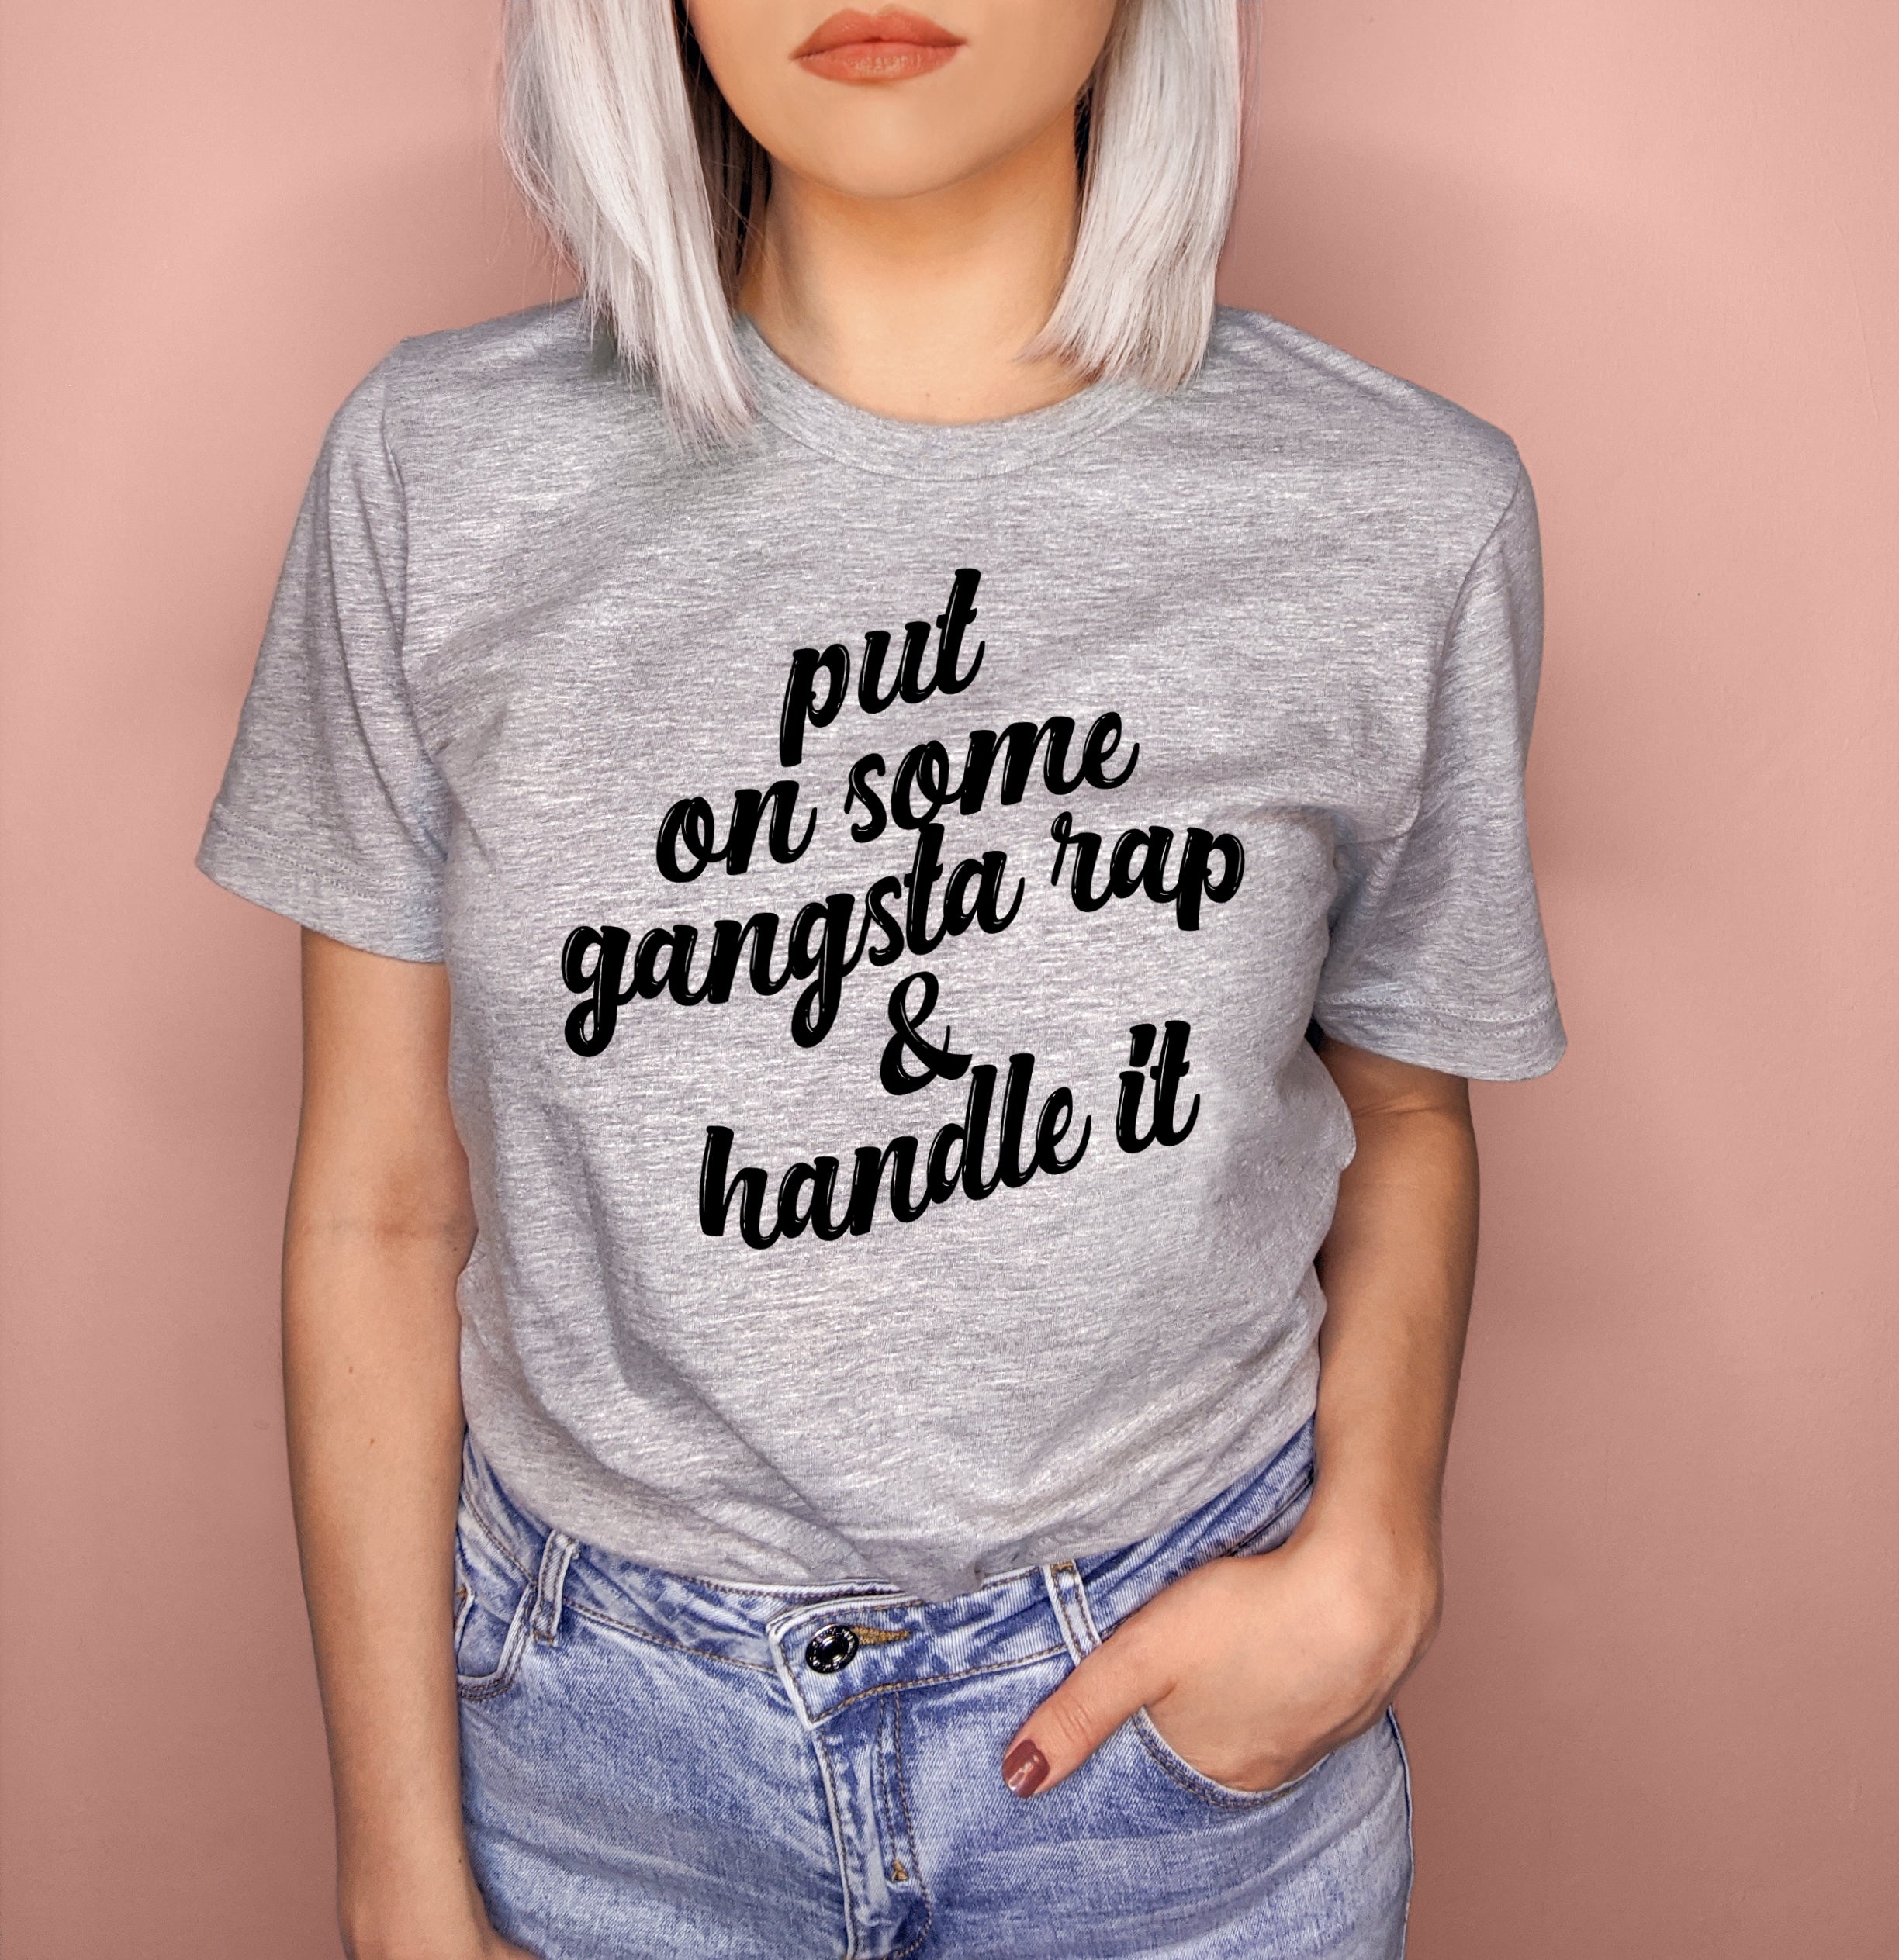 Heather grey shirt that says put on some gangsta rap and handle it - HighCiti